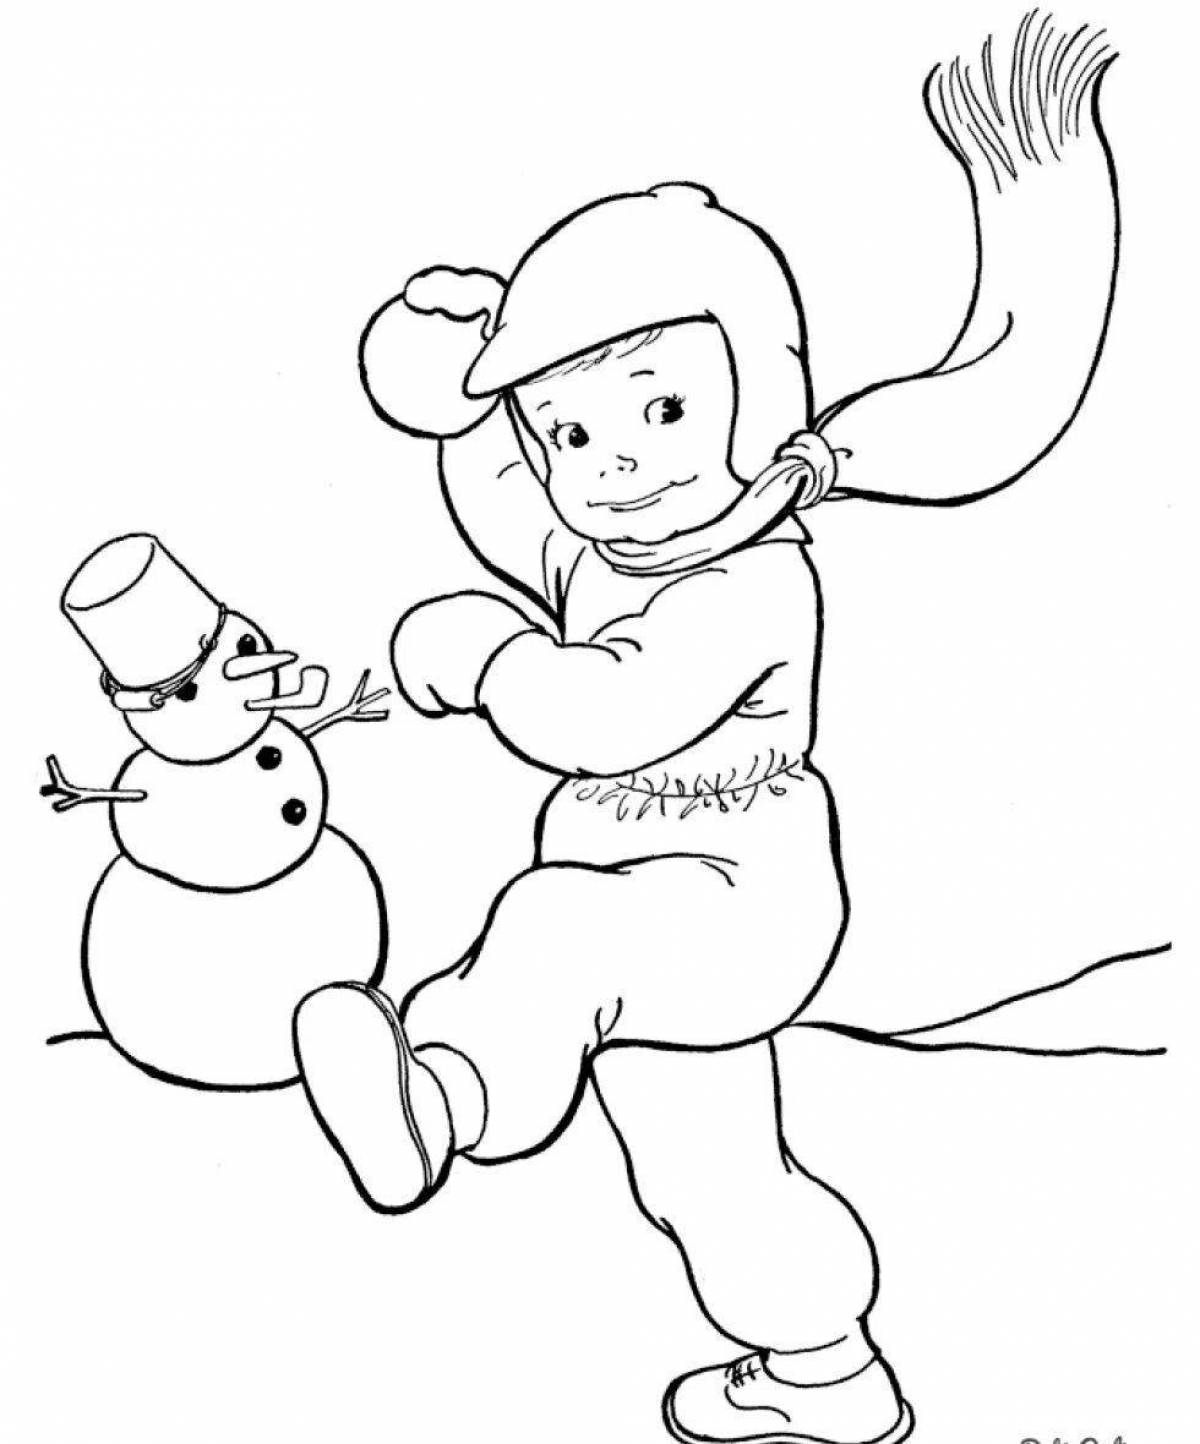 Stimulated coloring children's entertainment in winter